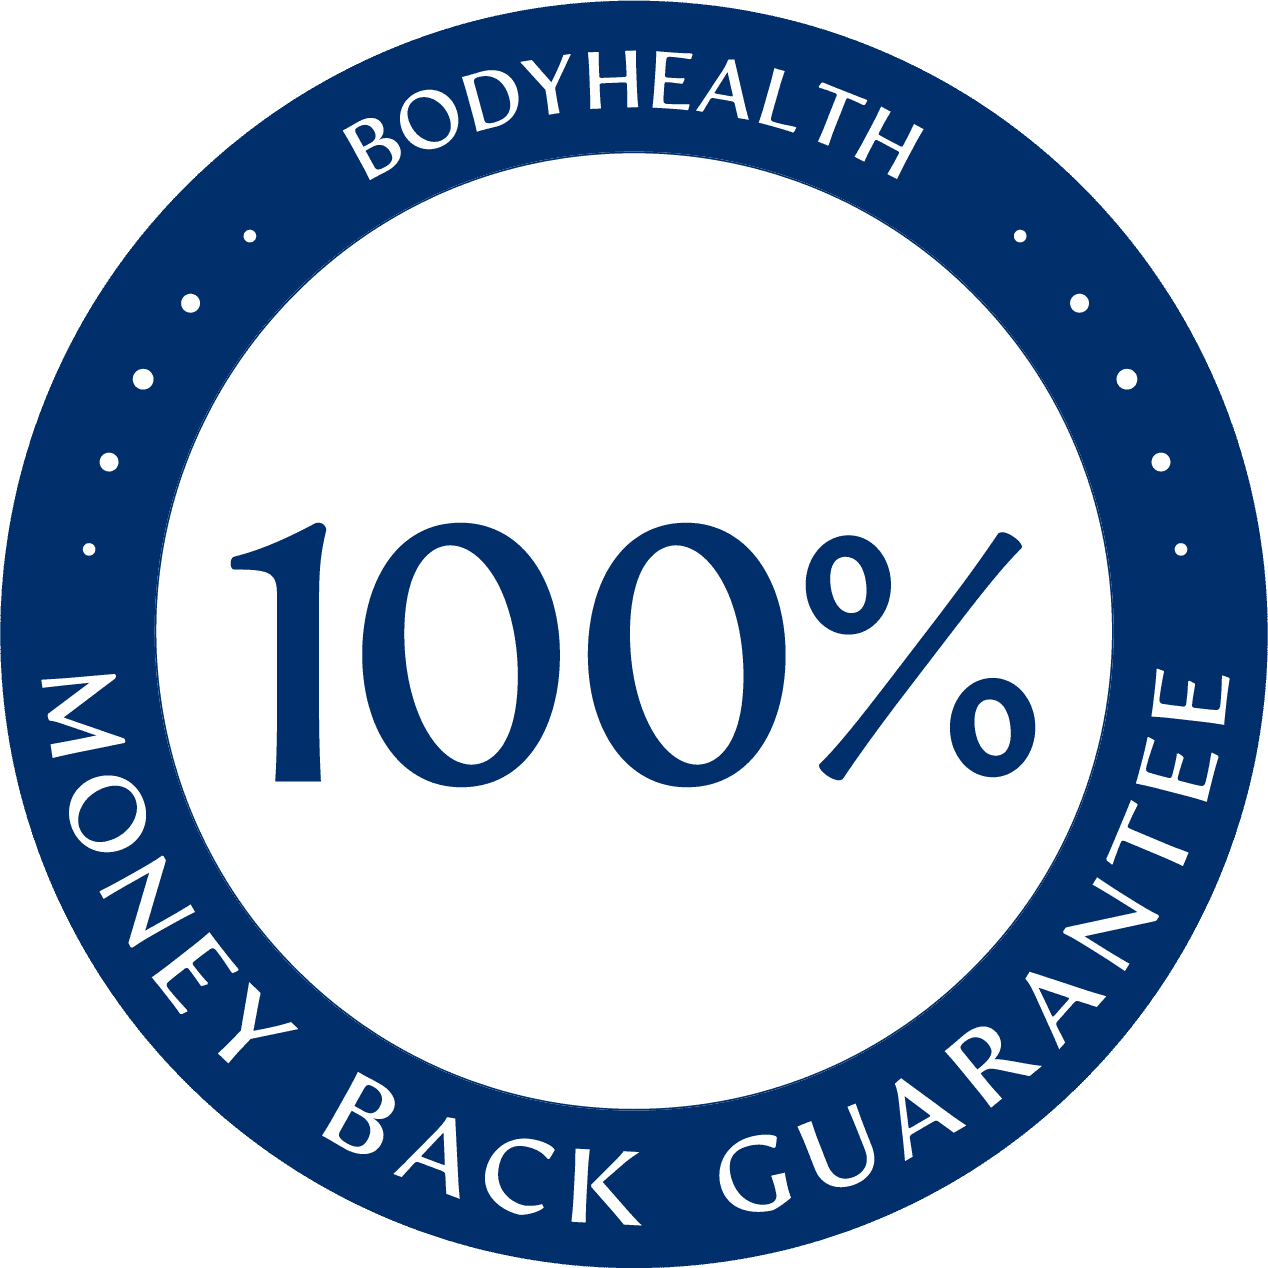 BodyHealth has a 100% money-back guarantee! Gold seal of satisfaction!